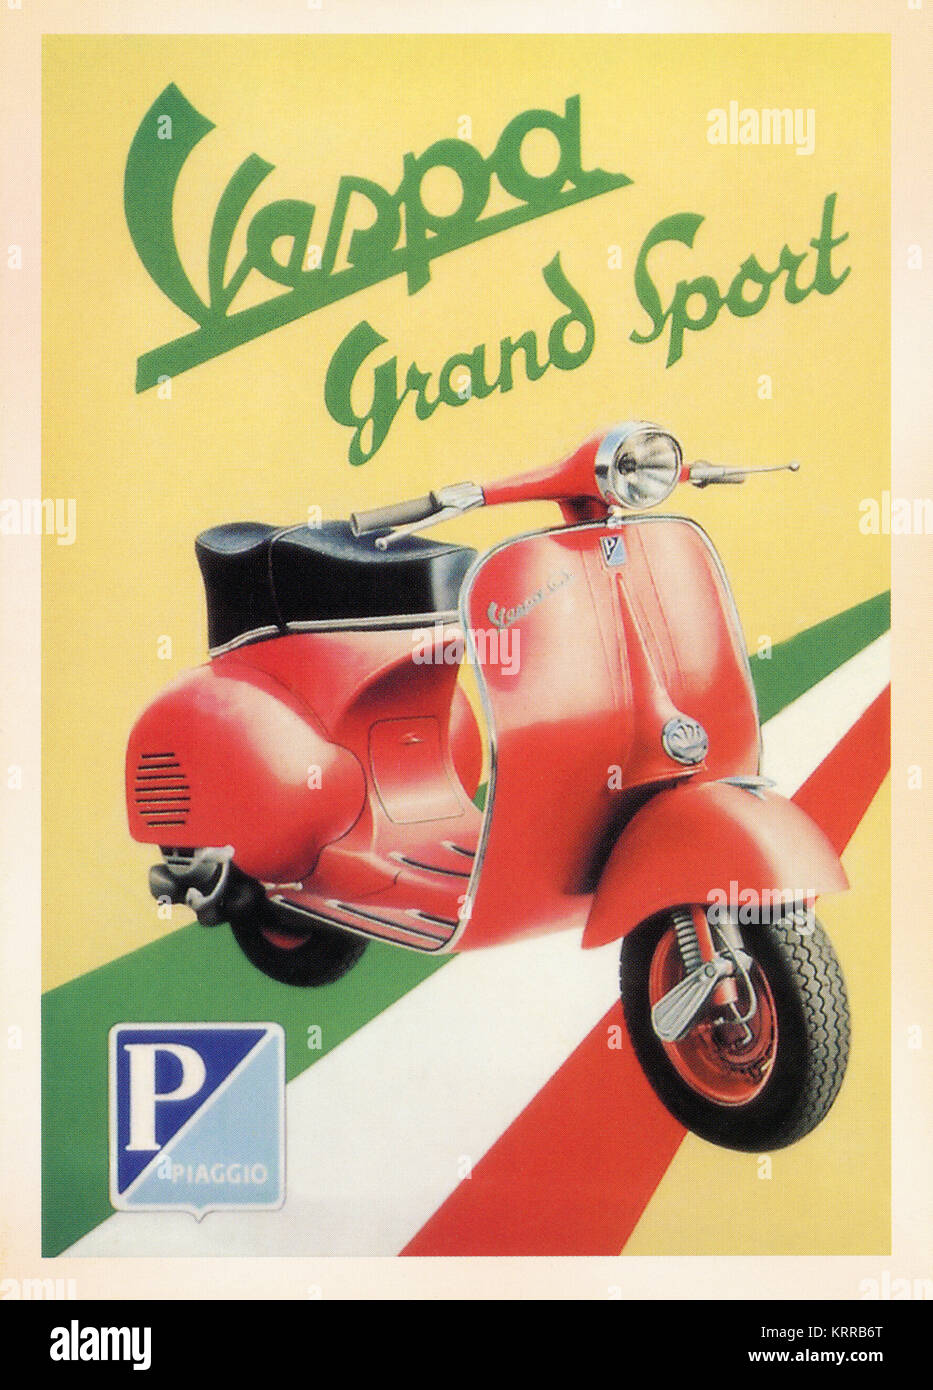 Vintage Poster card - printed during World War Ⅱ. Showing up VESPA - Grand Stock Alamy